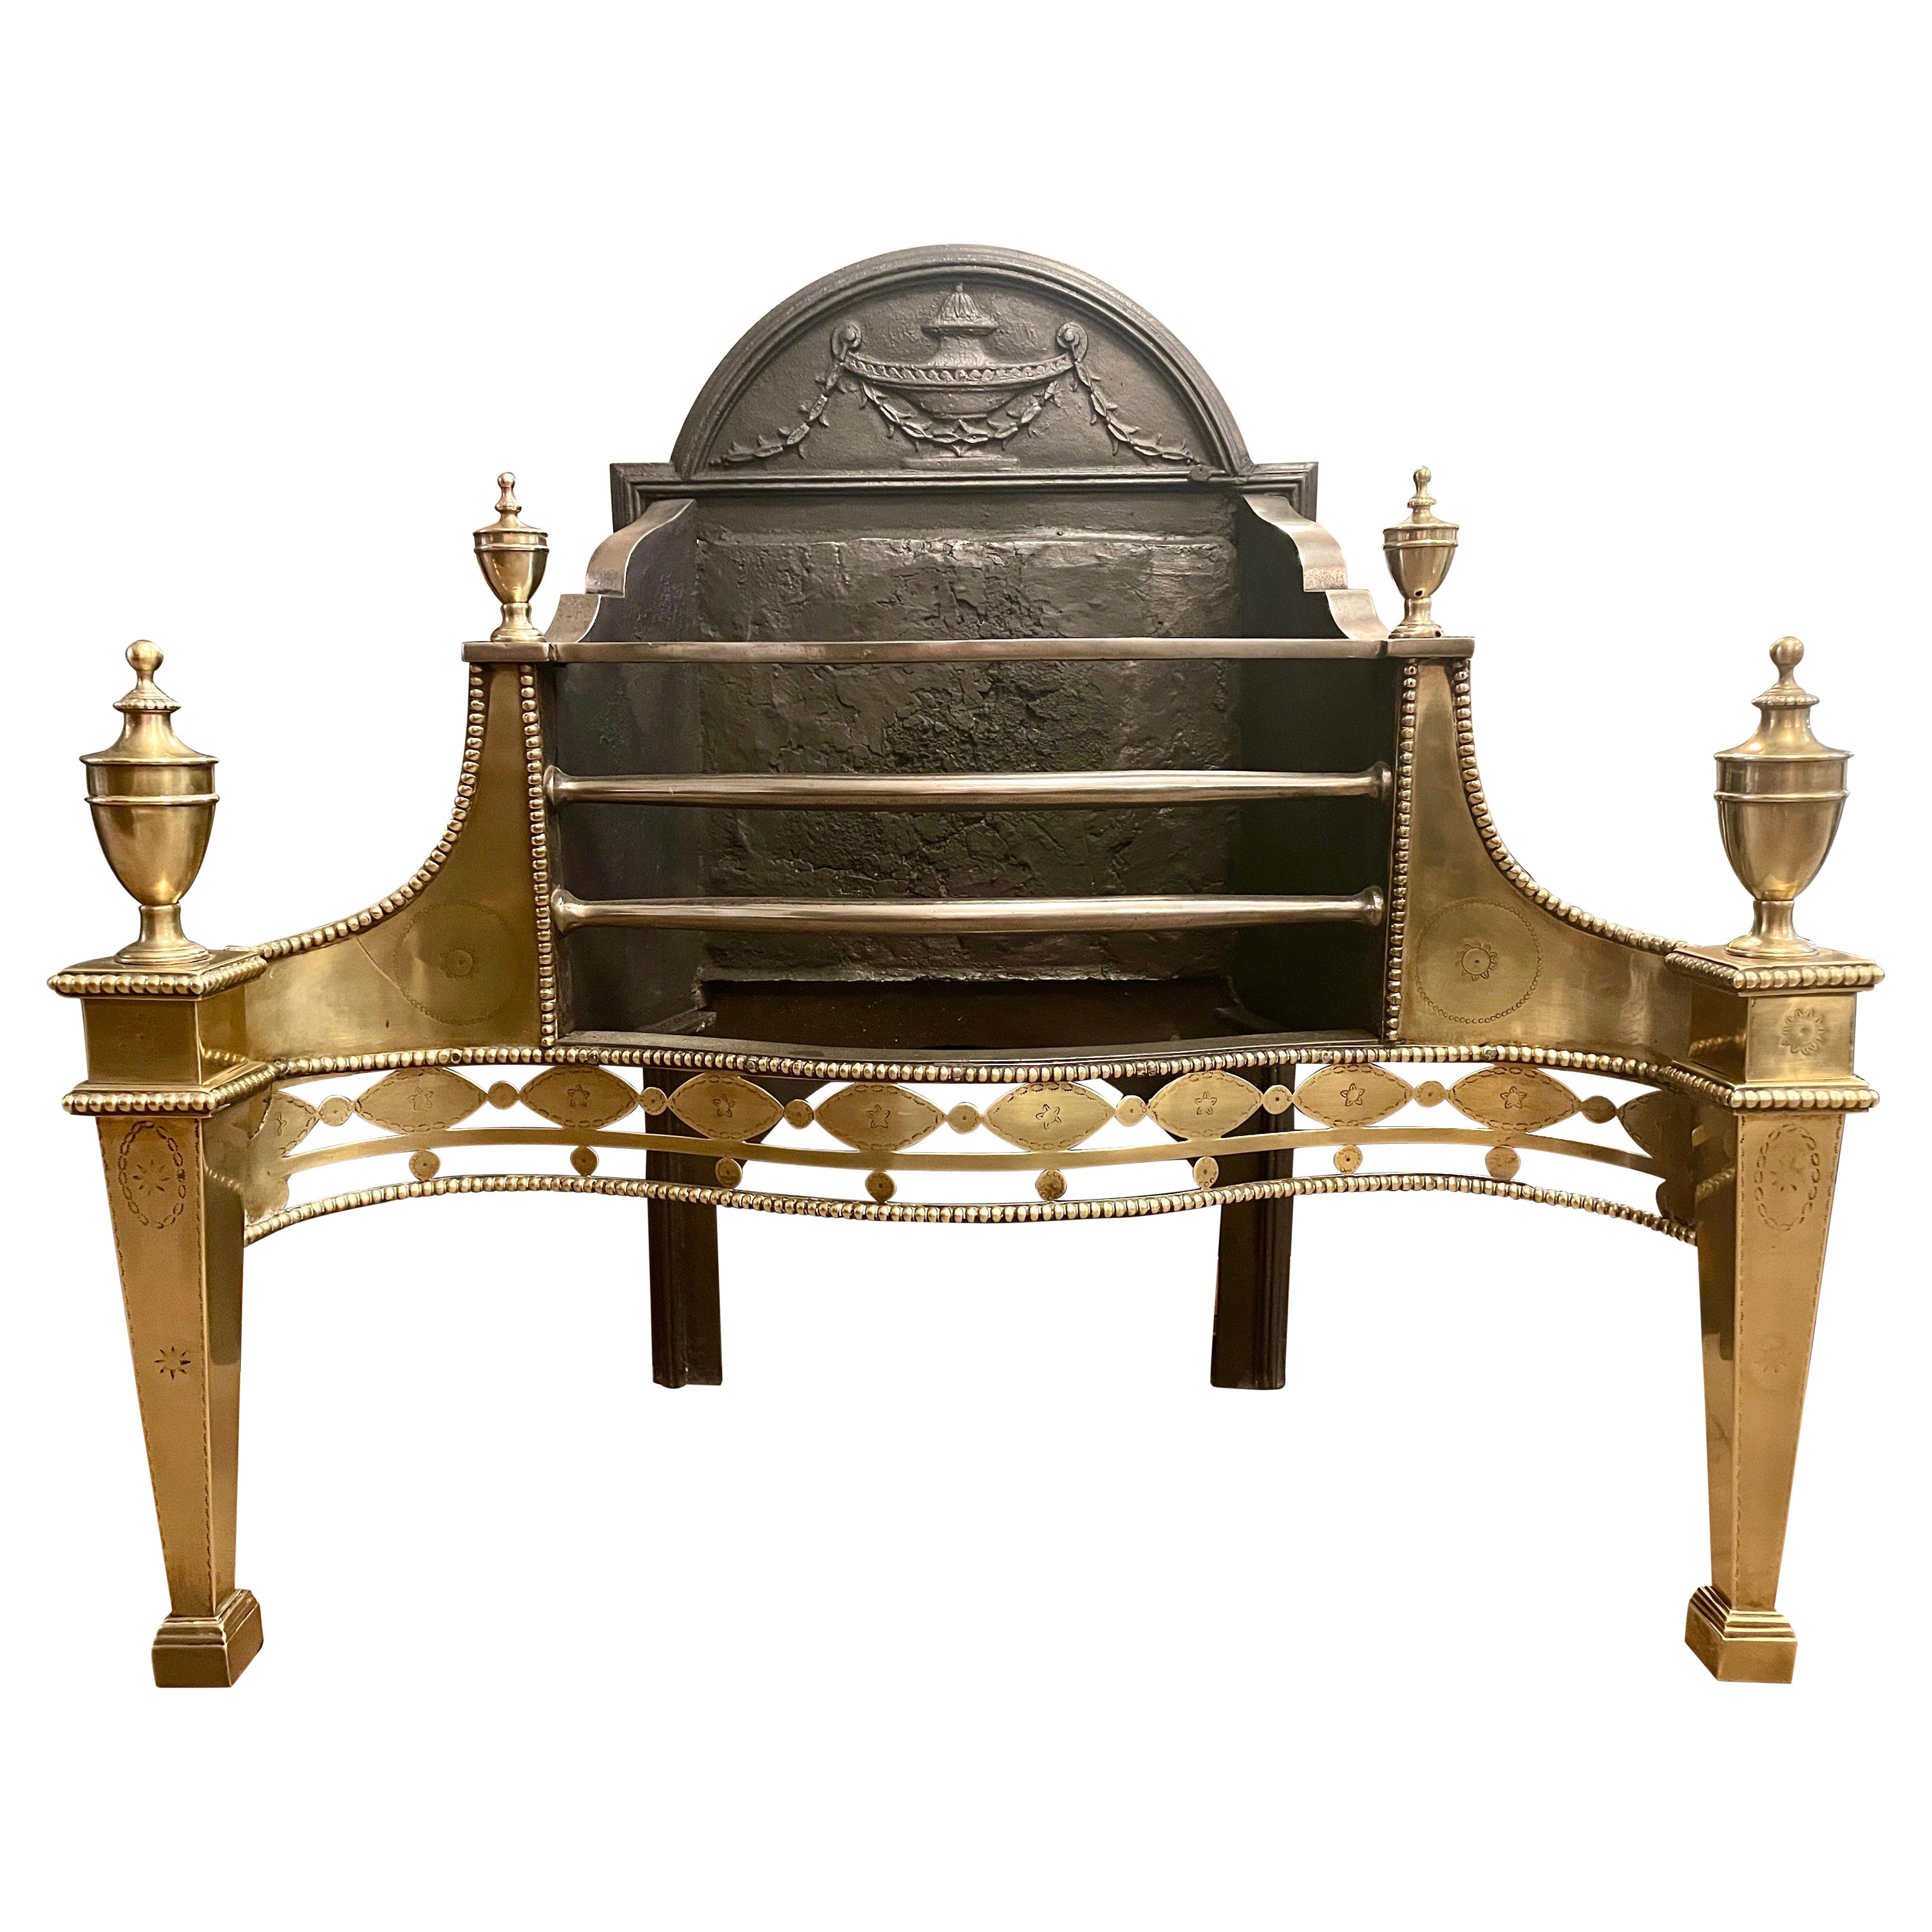 19th Century Adams Style Fire Grate by Thomas Elsley For Sale